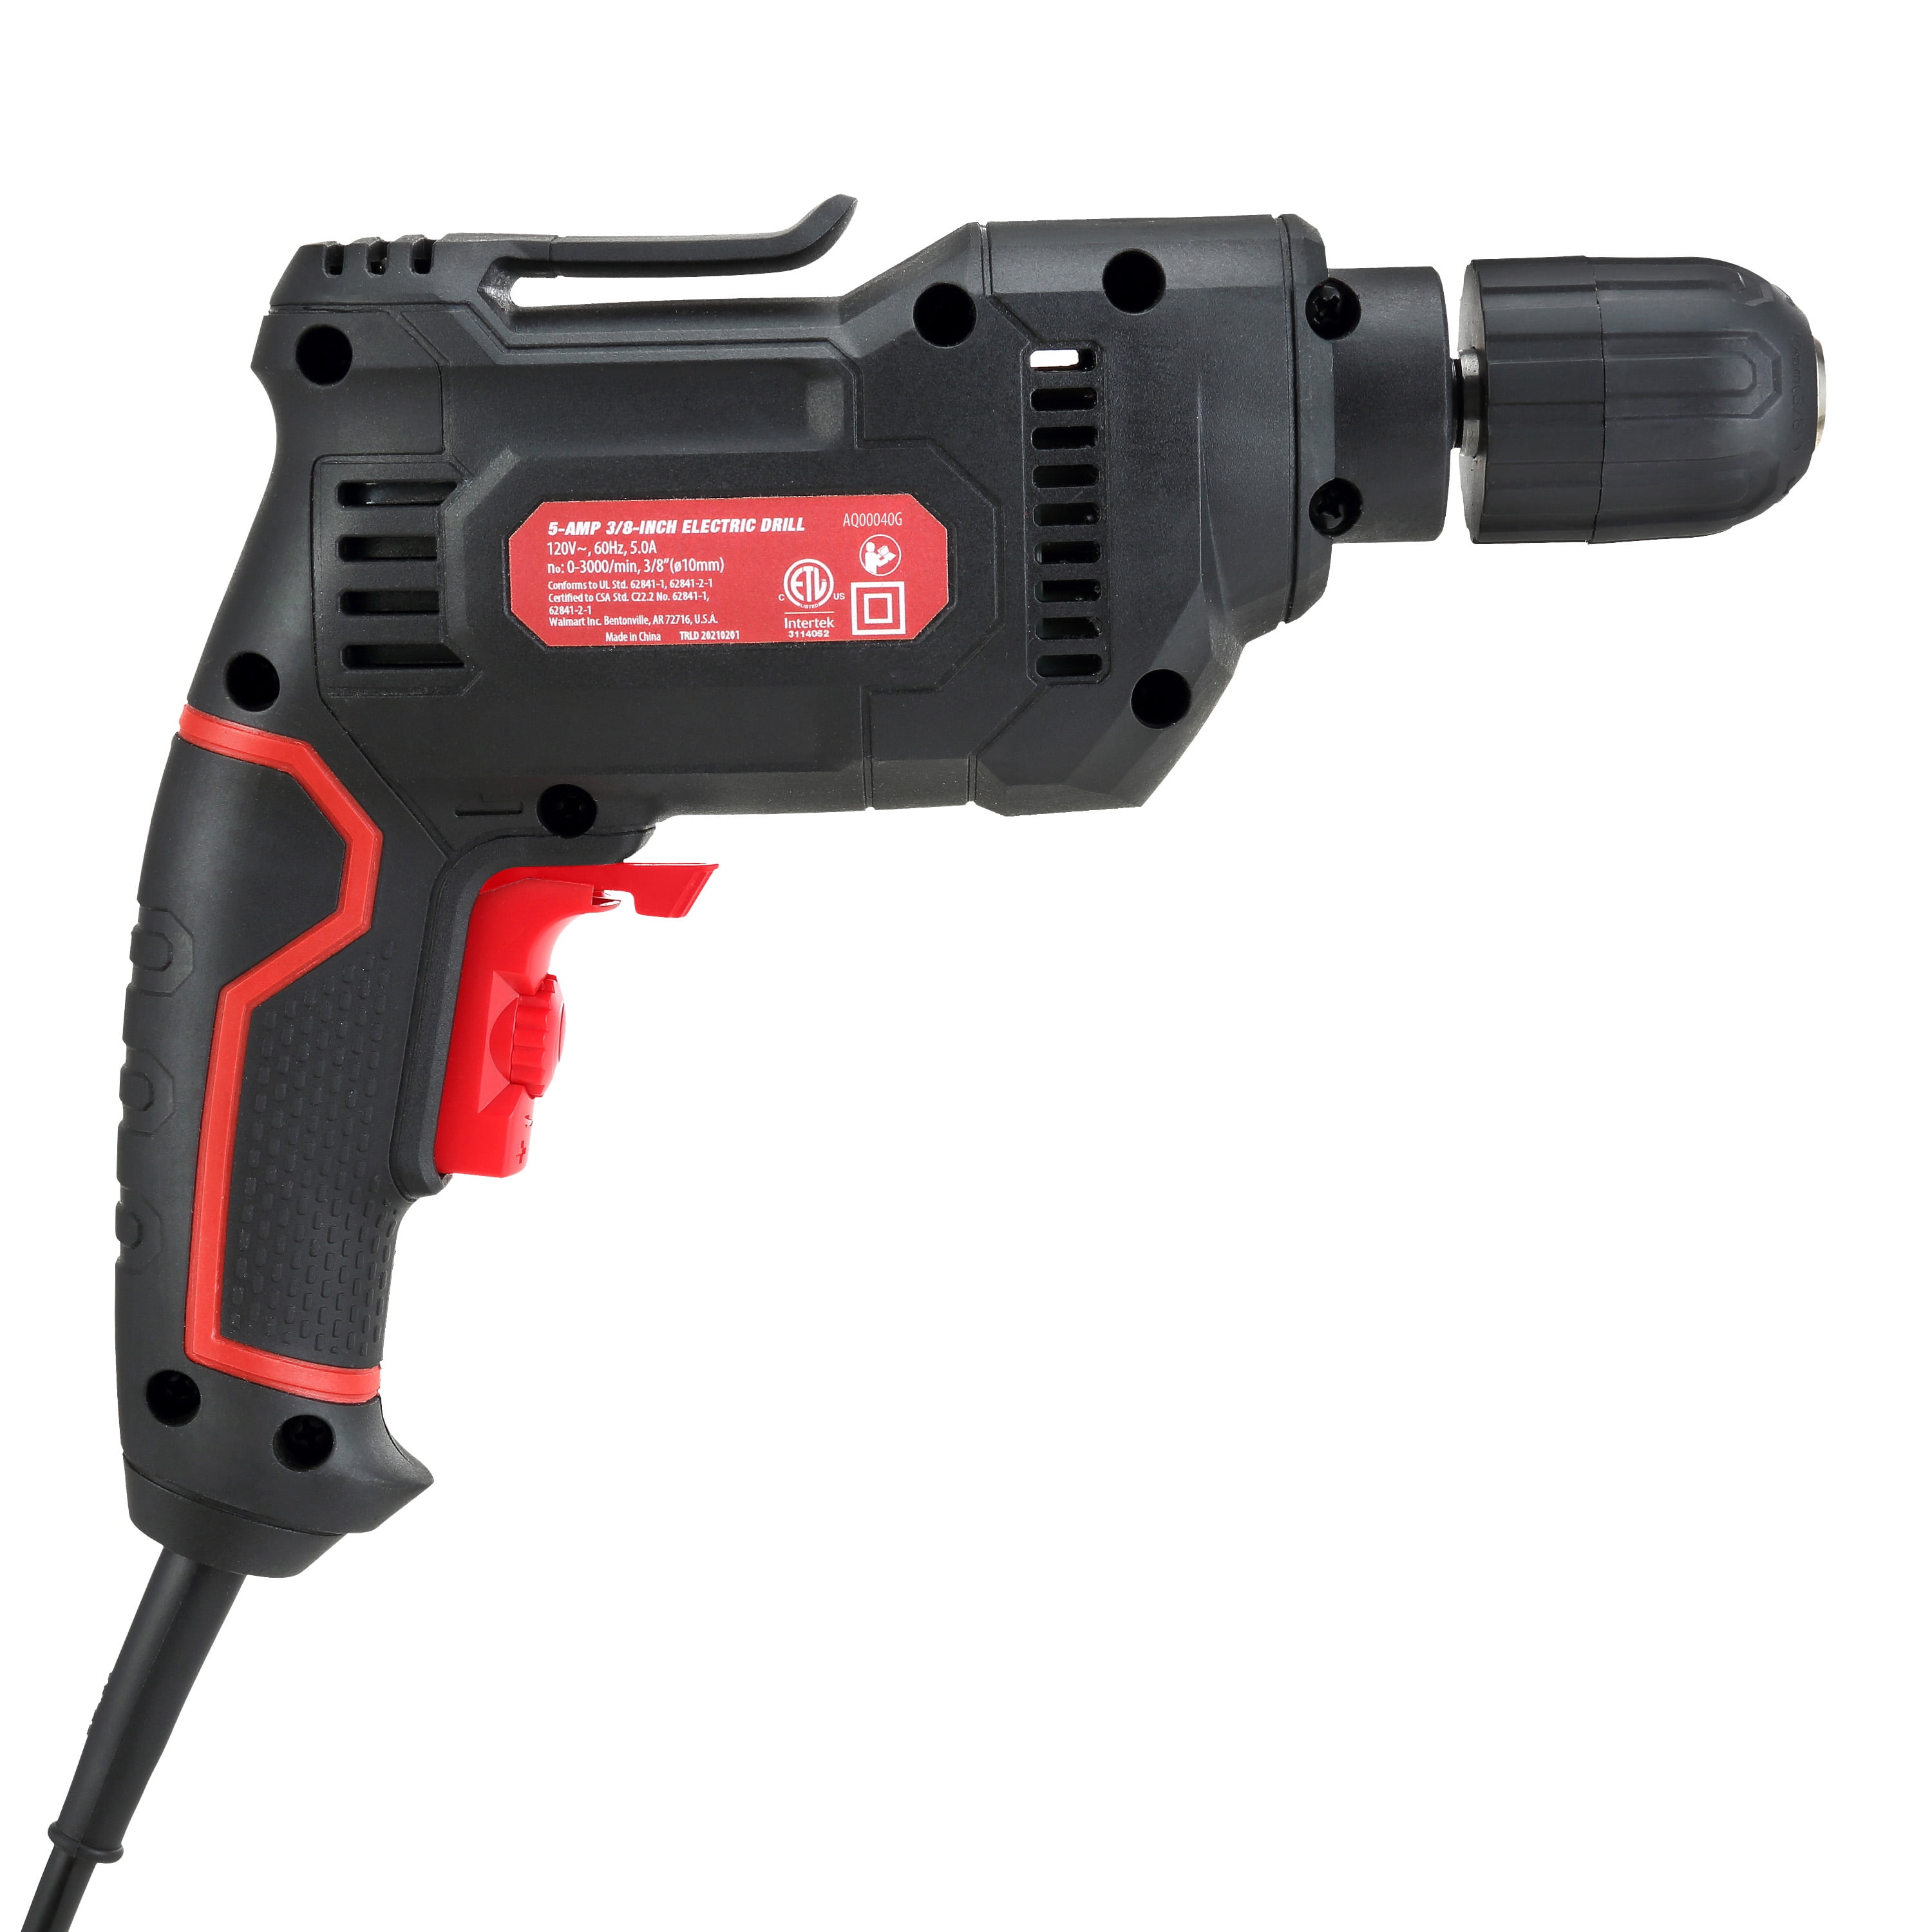 Hyper Tough 5.0amp, 120 Volts 3/8 inch Electric Drill 